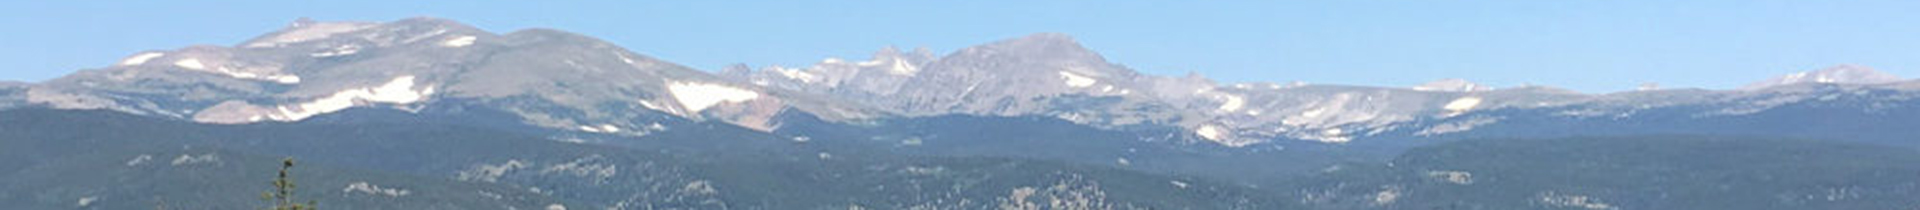 Panoramic view of the back range of the northern Colorado Rockies from Reynolds Ranch Open Space